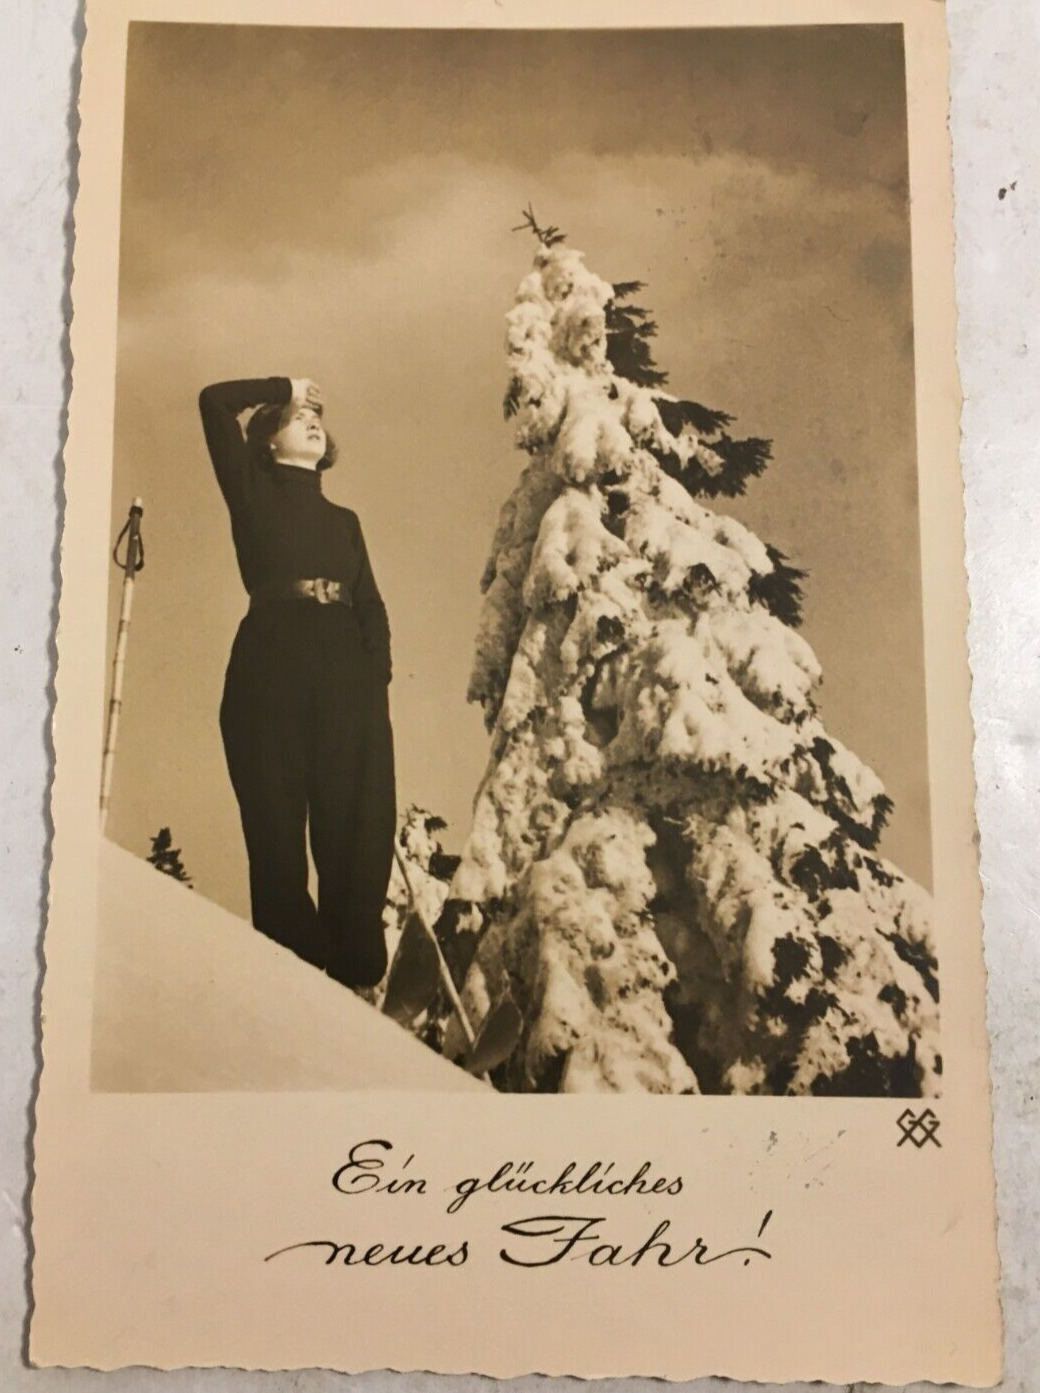 1937 German Postcard Posted with Note Written in German